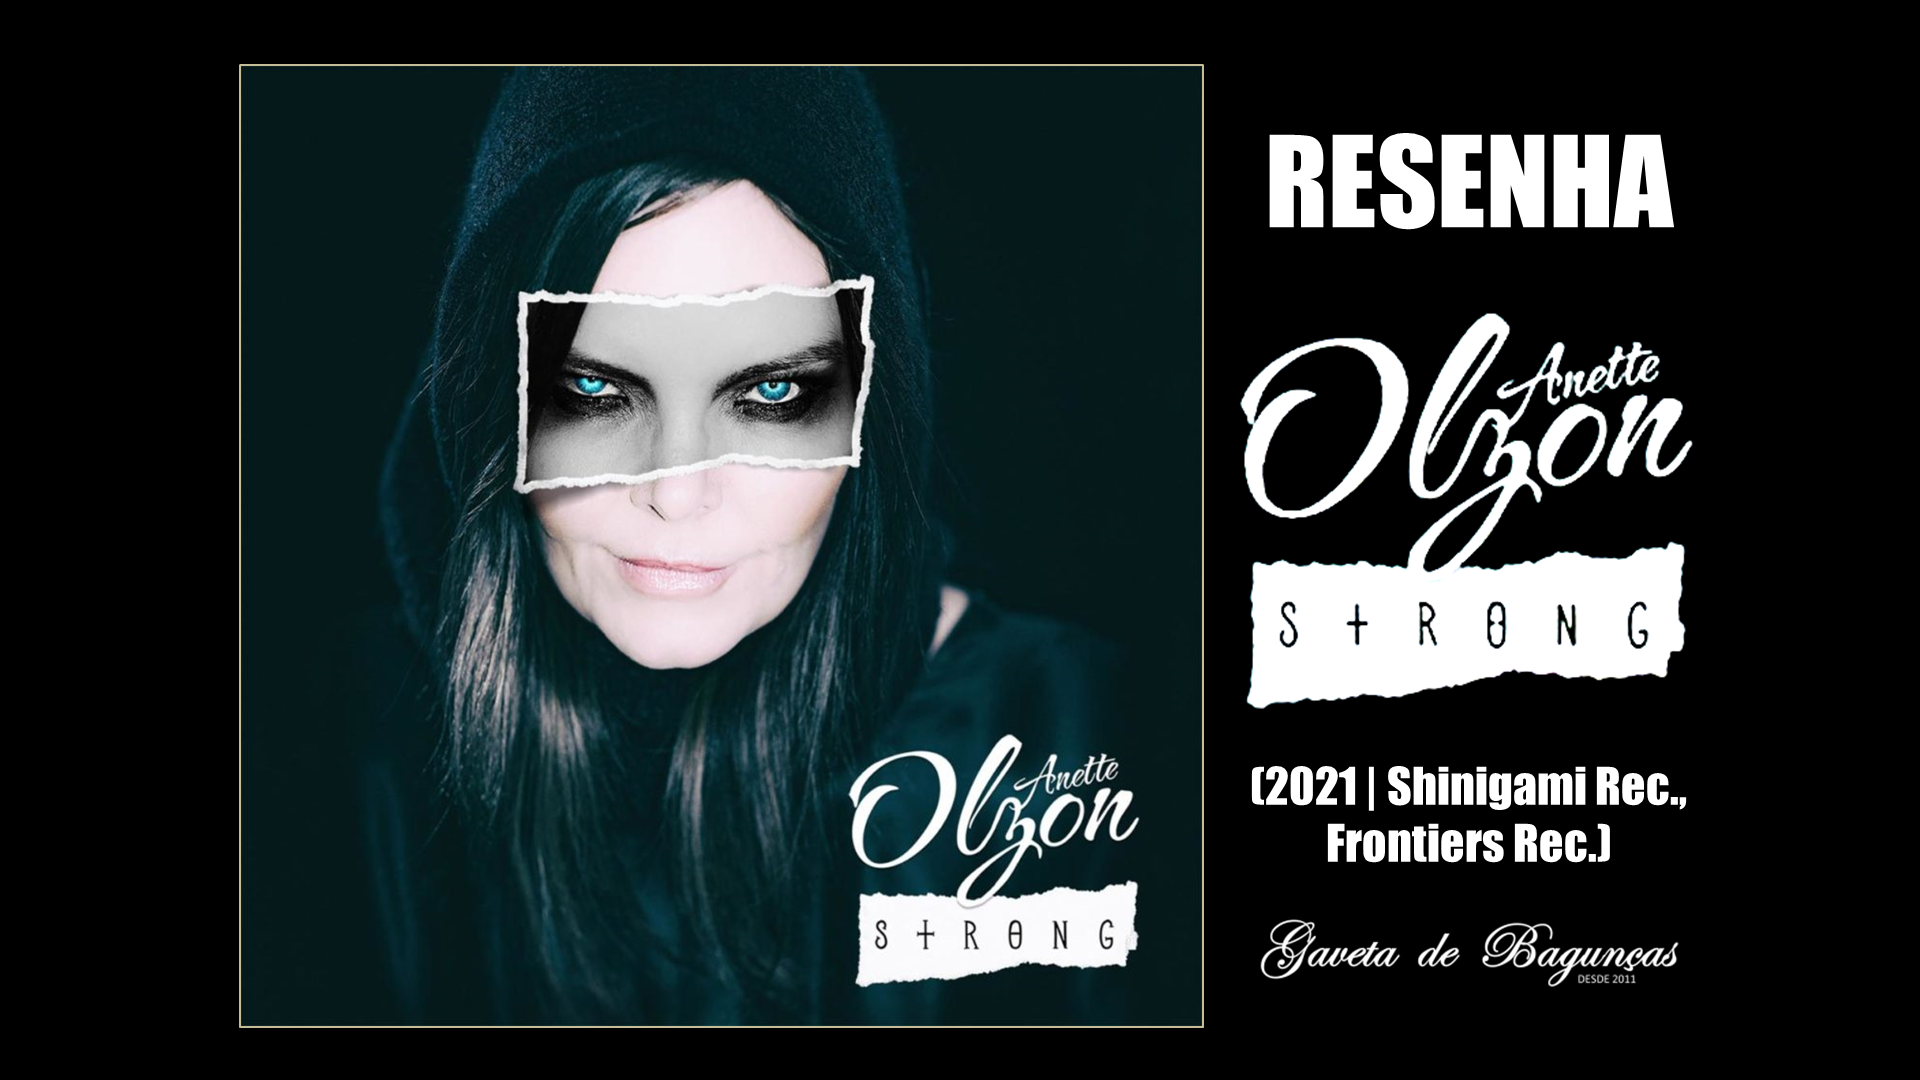 Anette Olzon - Strong Resenha (2021) Review